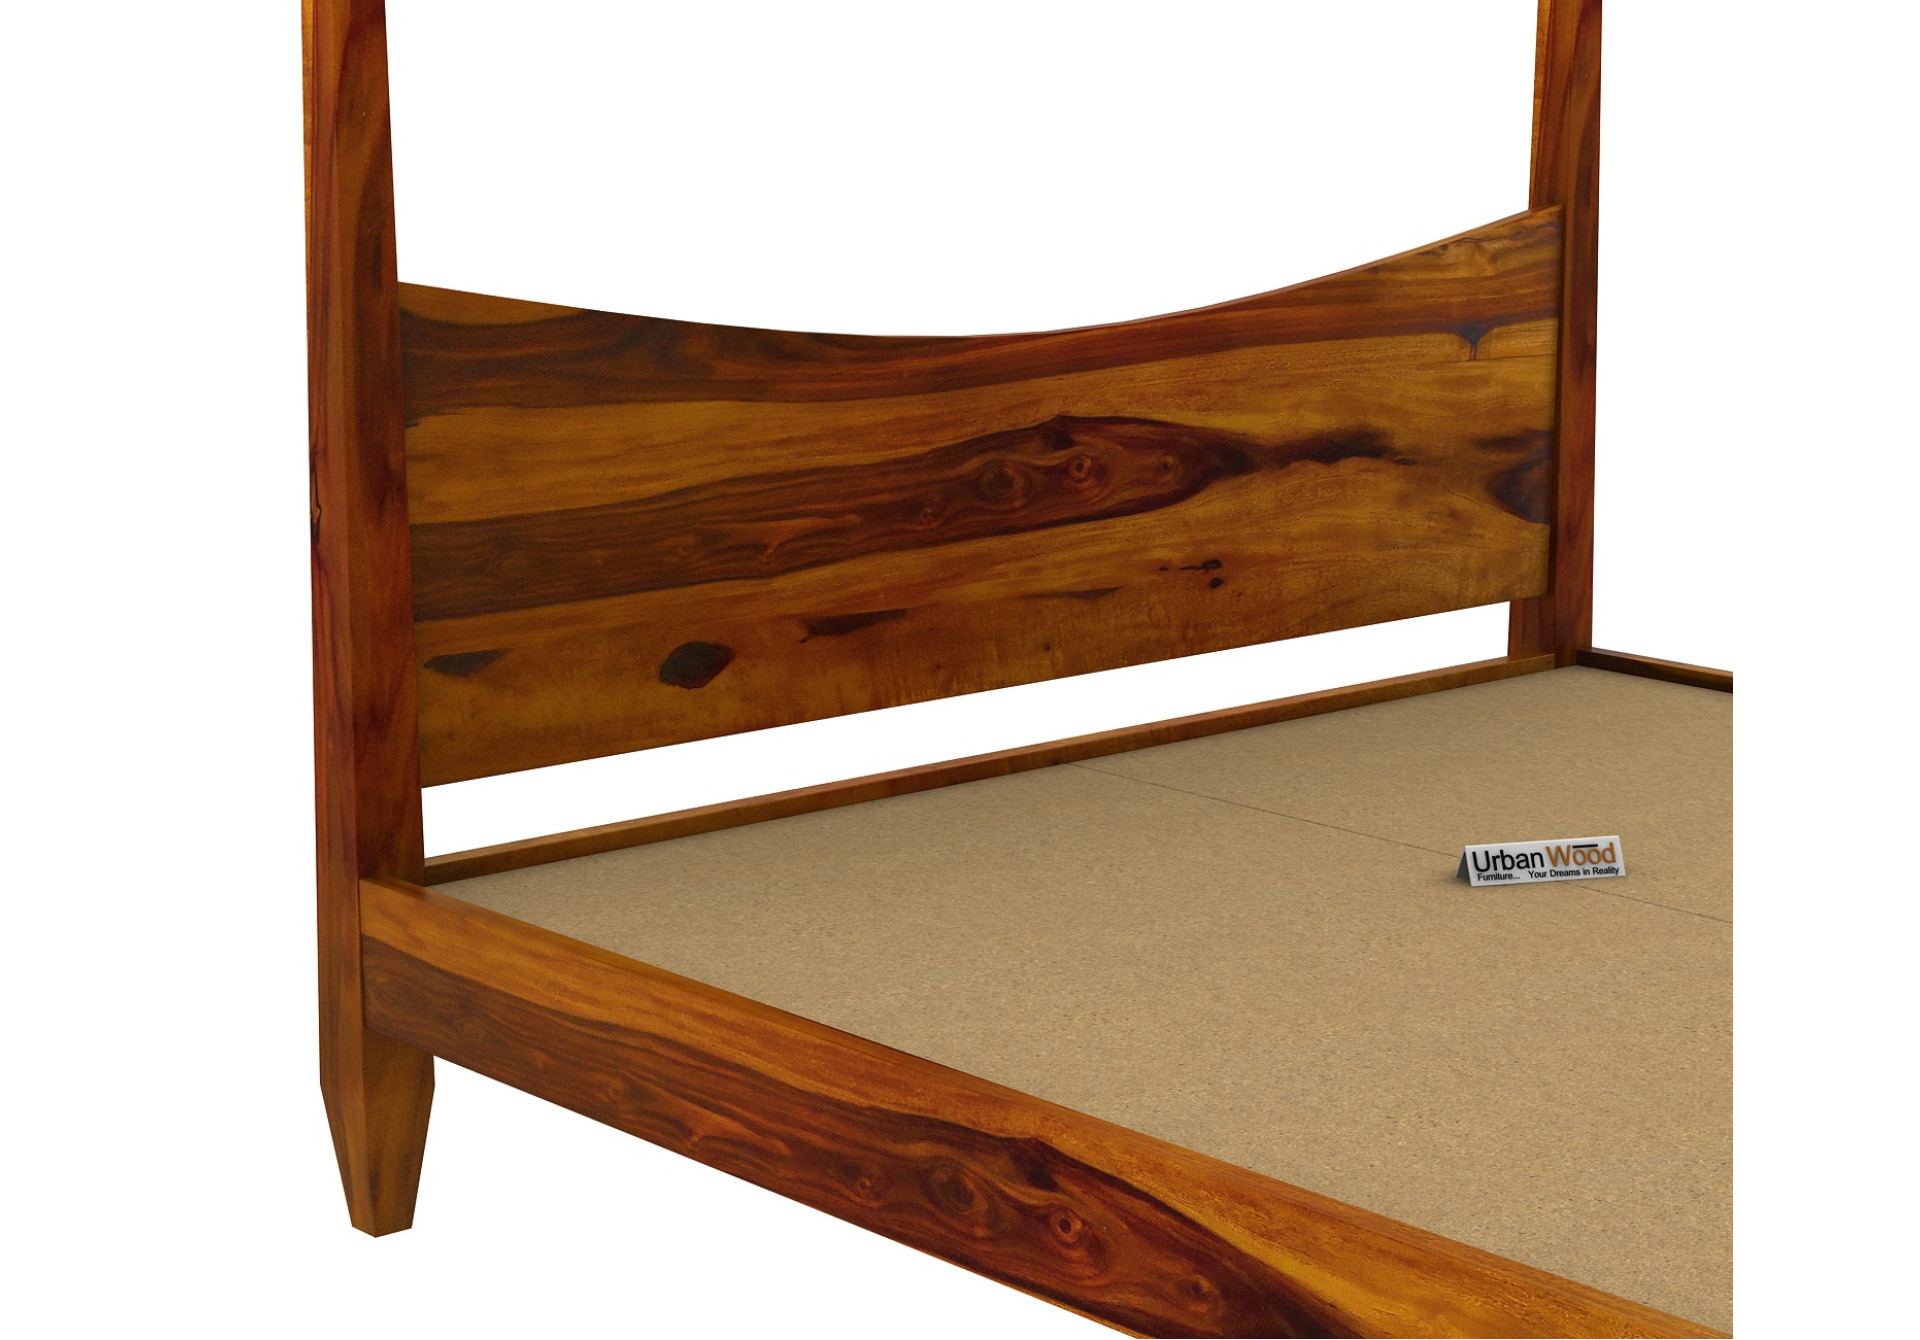 Flora Poster Bed (Queen Size, Honey Finish)